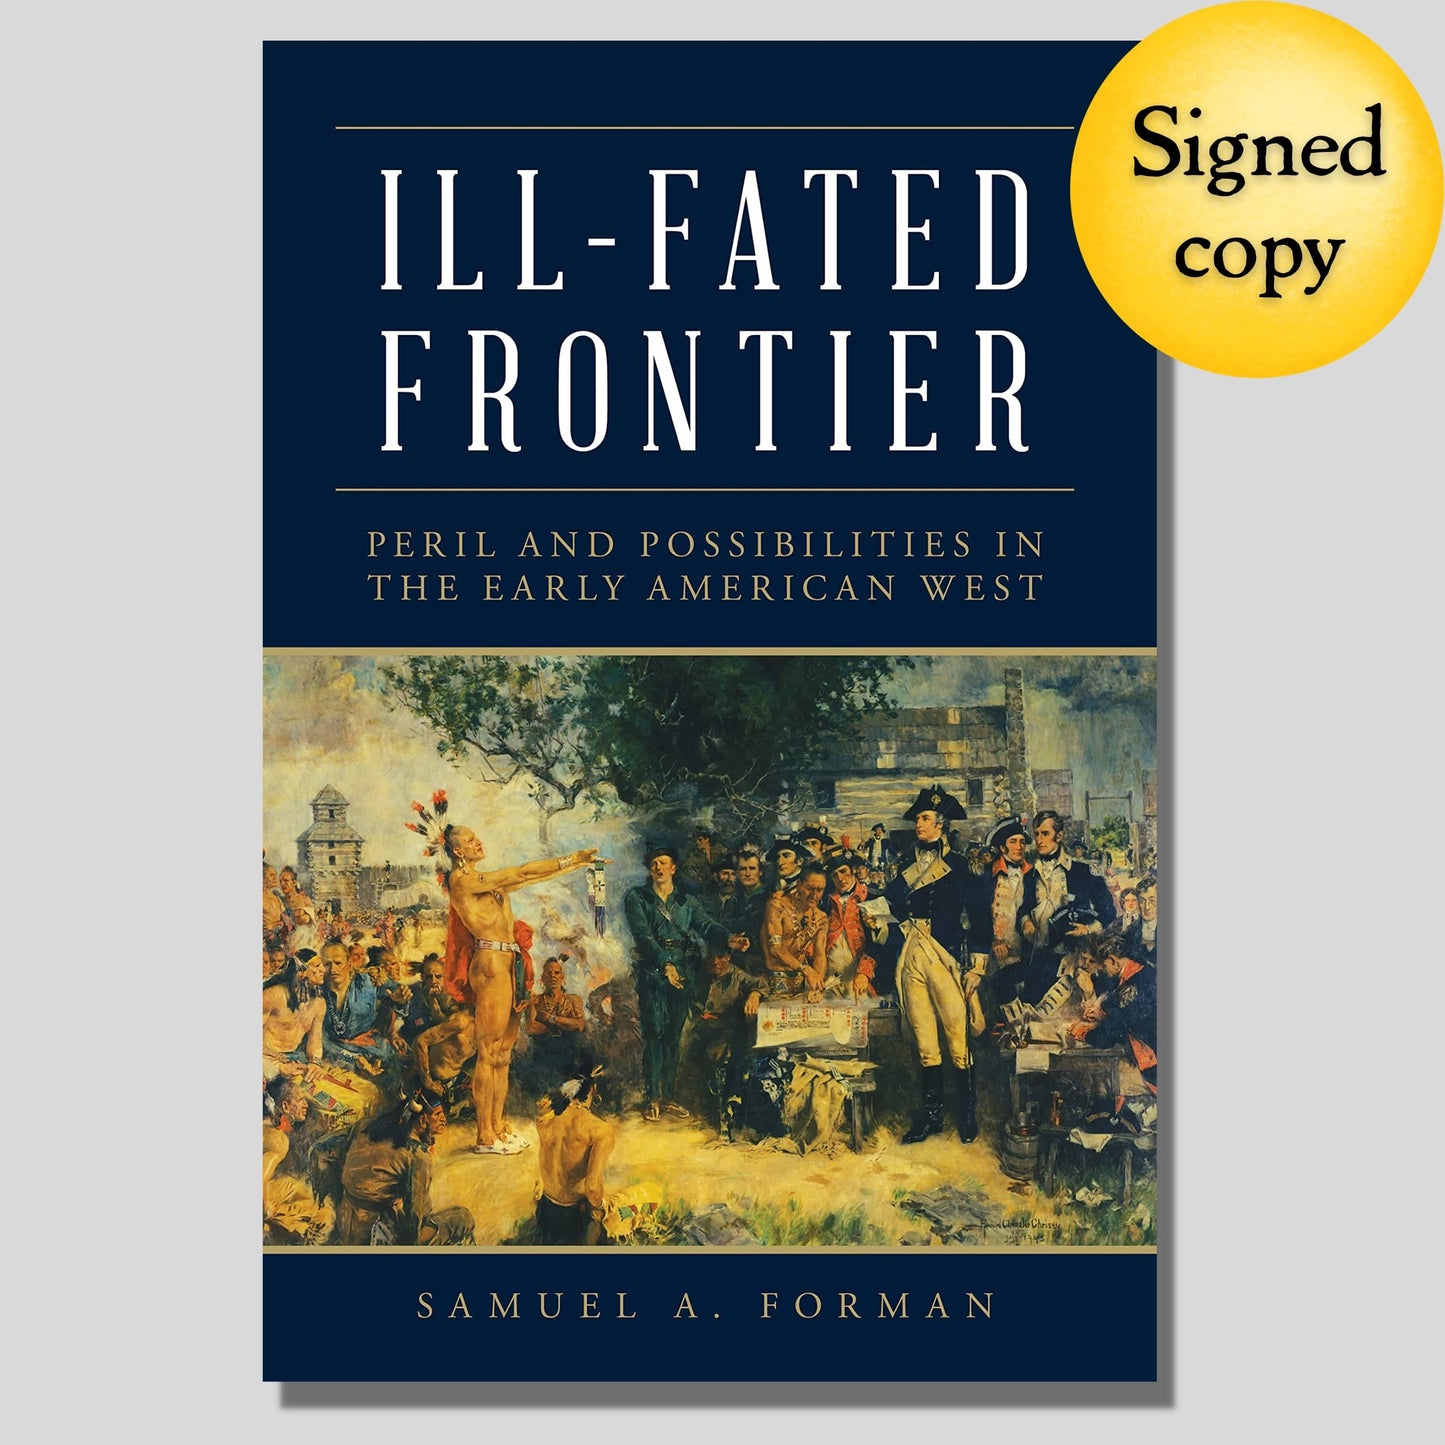 "Ill-Fated Frontier: Peril and Possibilities in the Early American West" - Signed by the author, Sam Forman